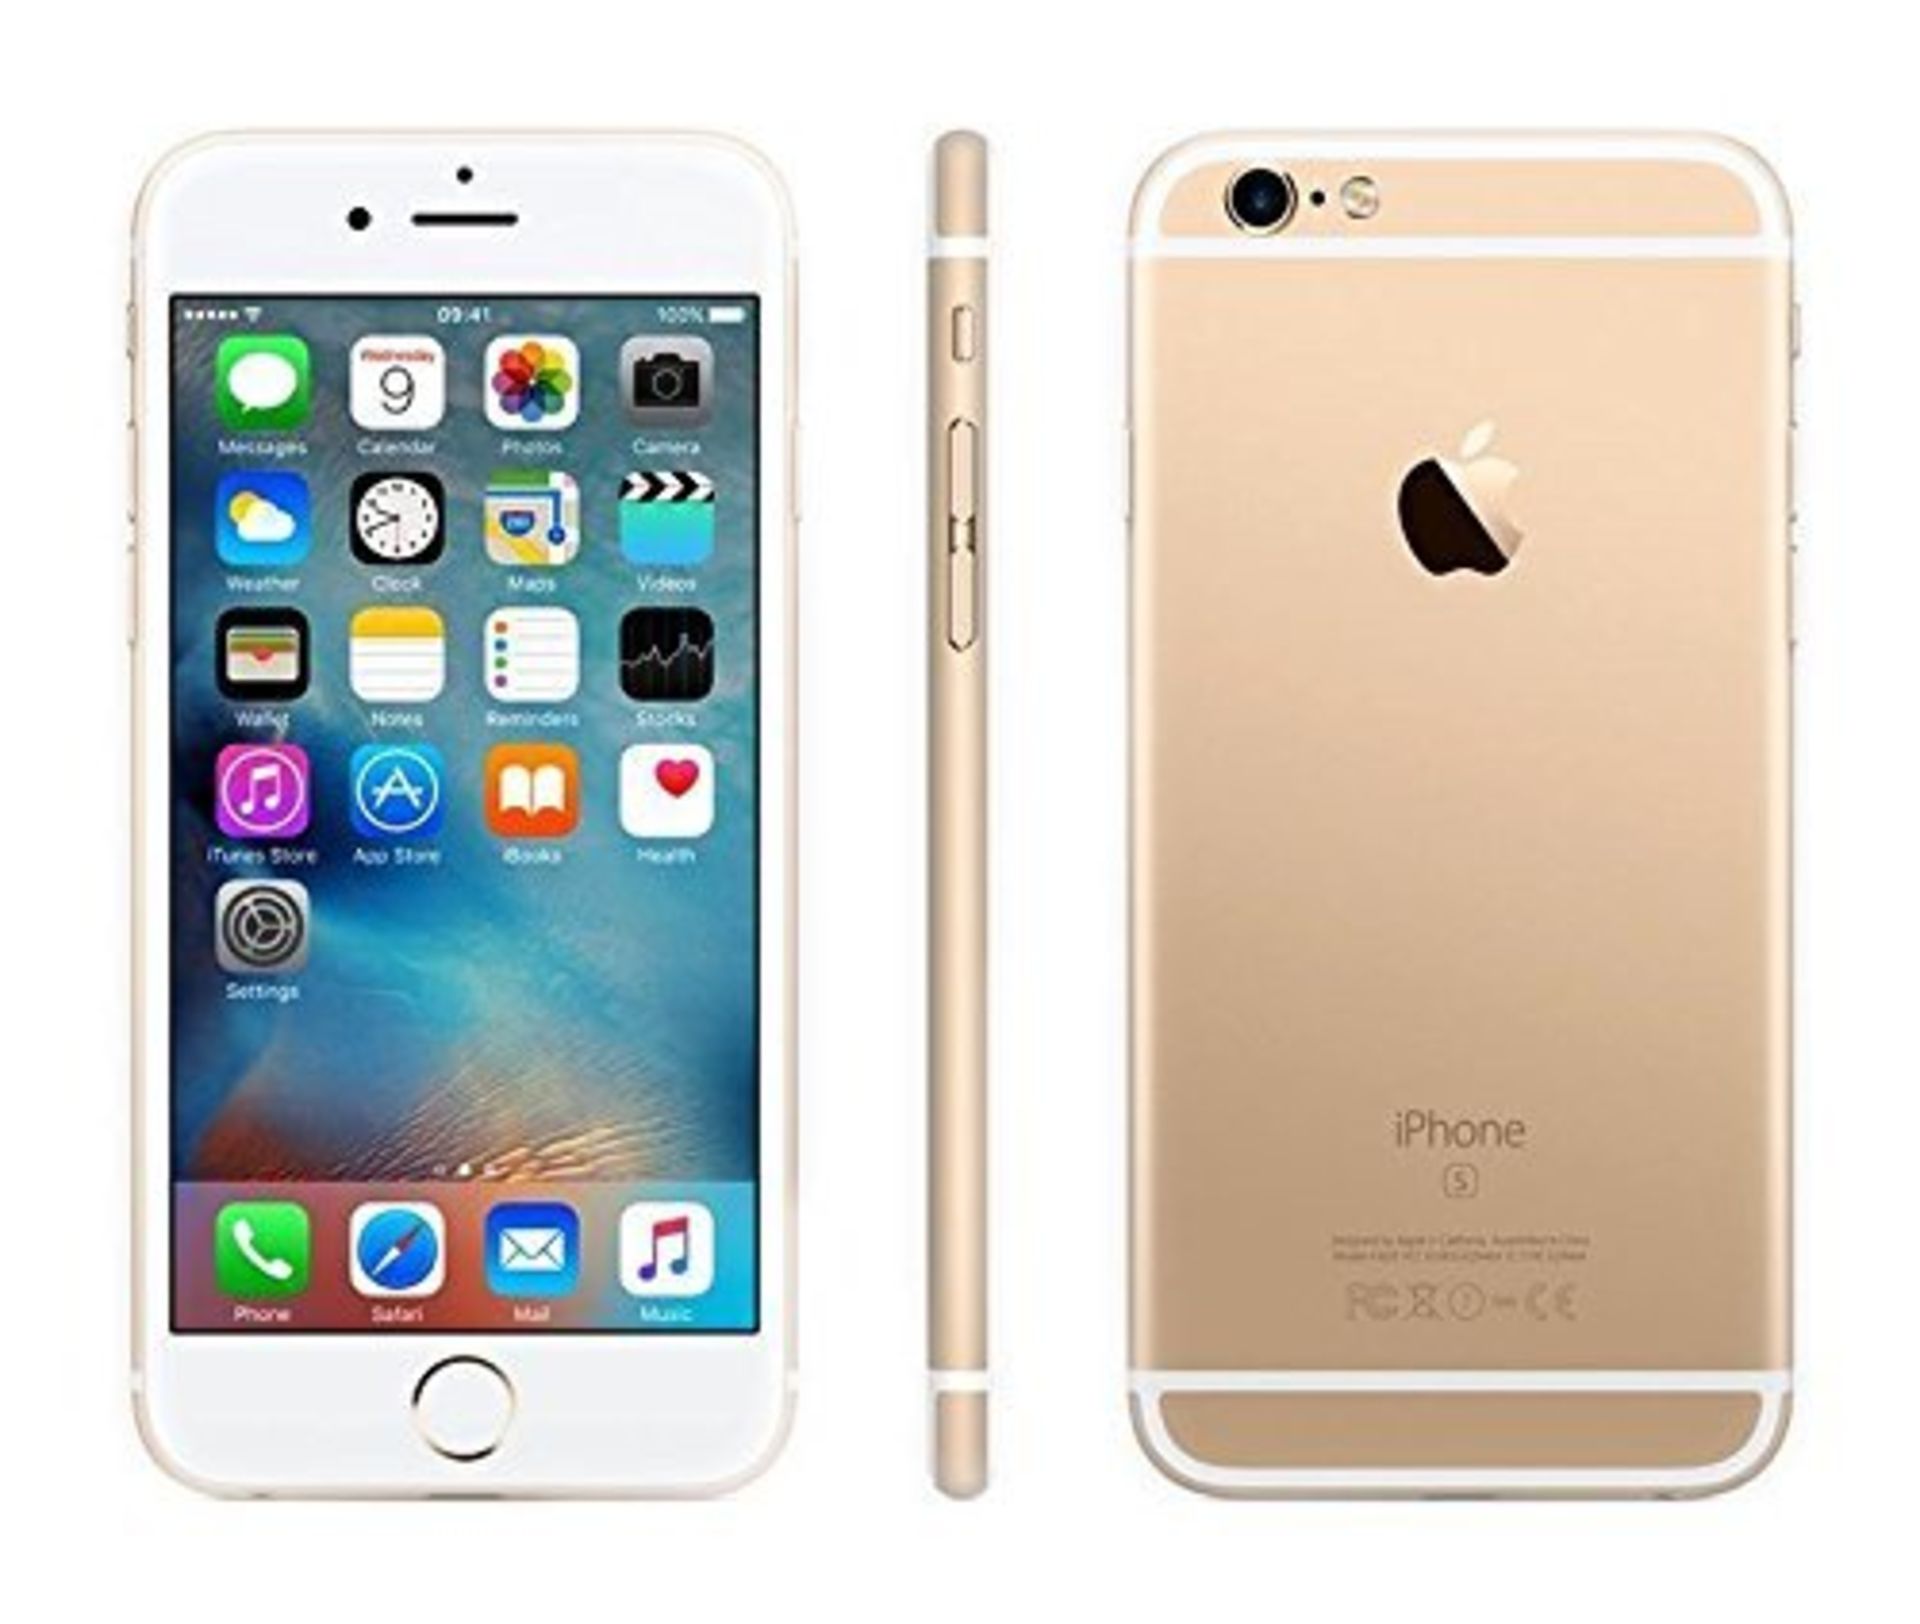 Grade A Apple iphone 6 128GB Colours May Vary Touch ID Item available approx 12 working days after